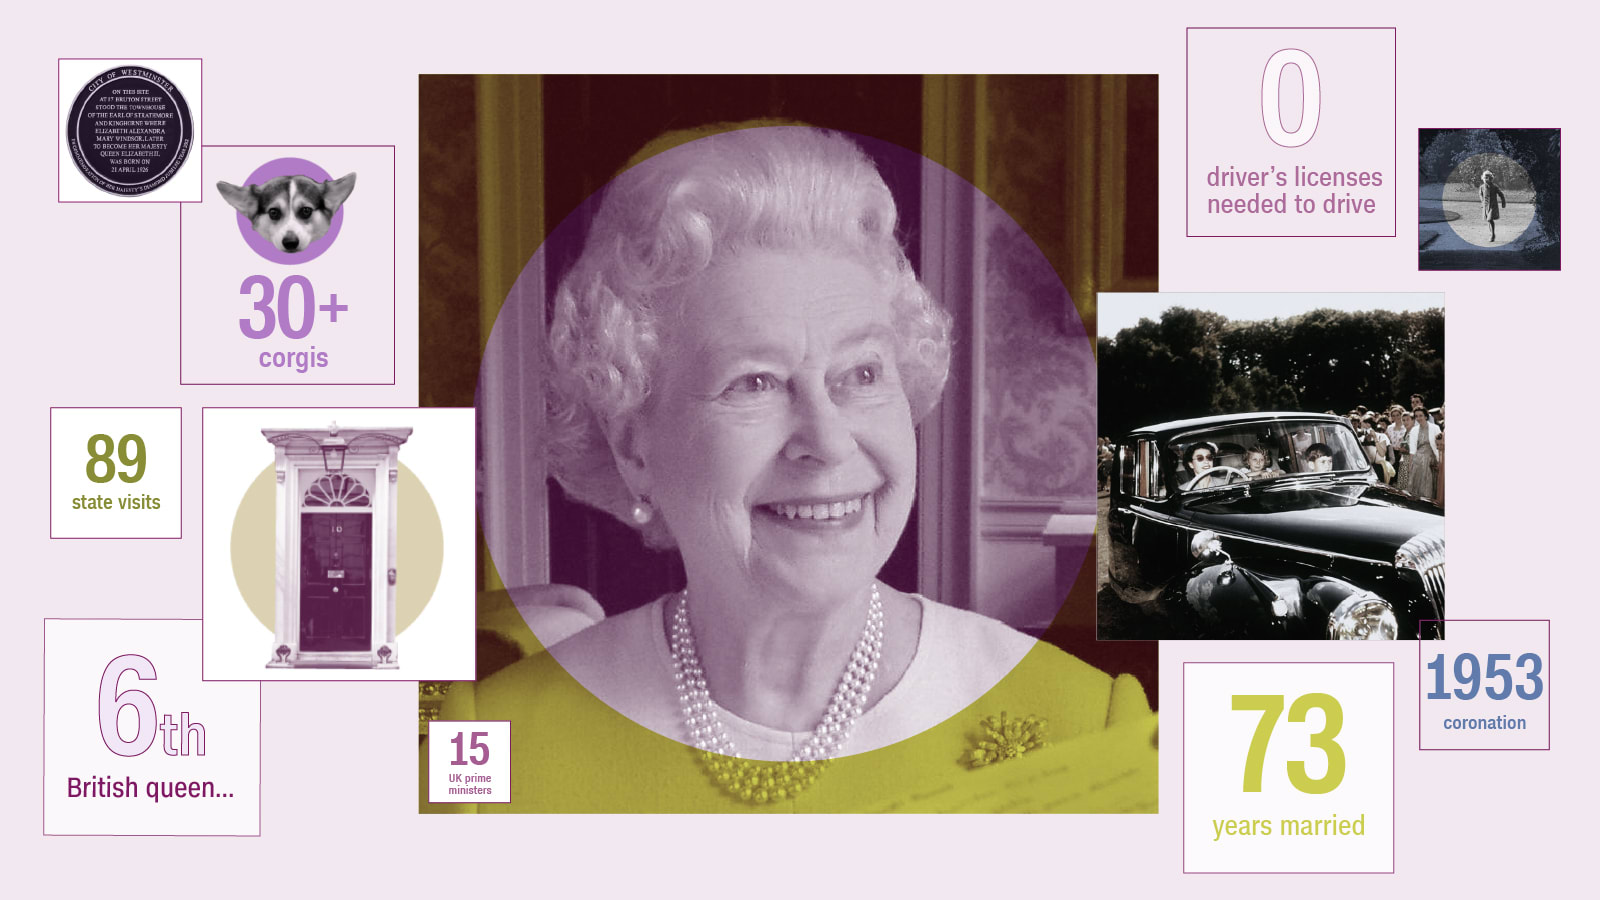 The Queen's life in numbers: Tallying an extraordinary reign